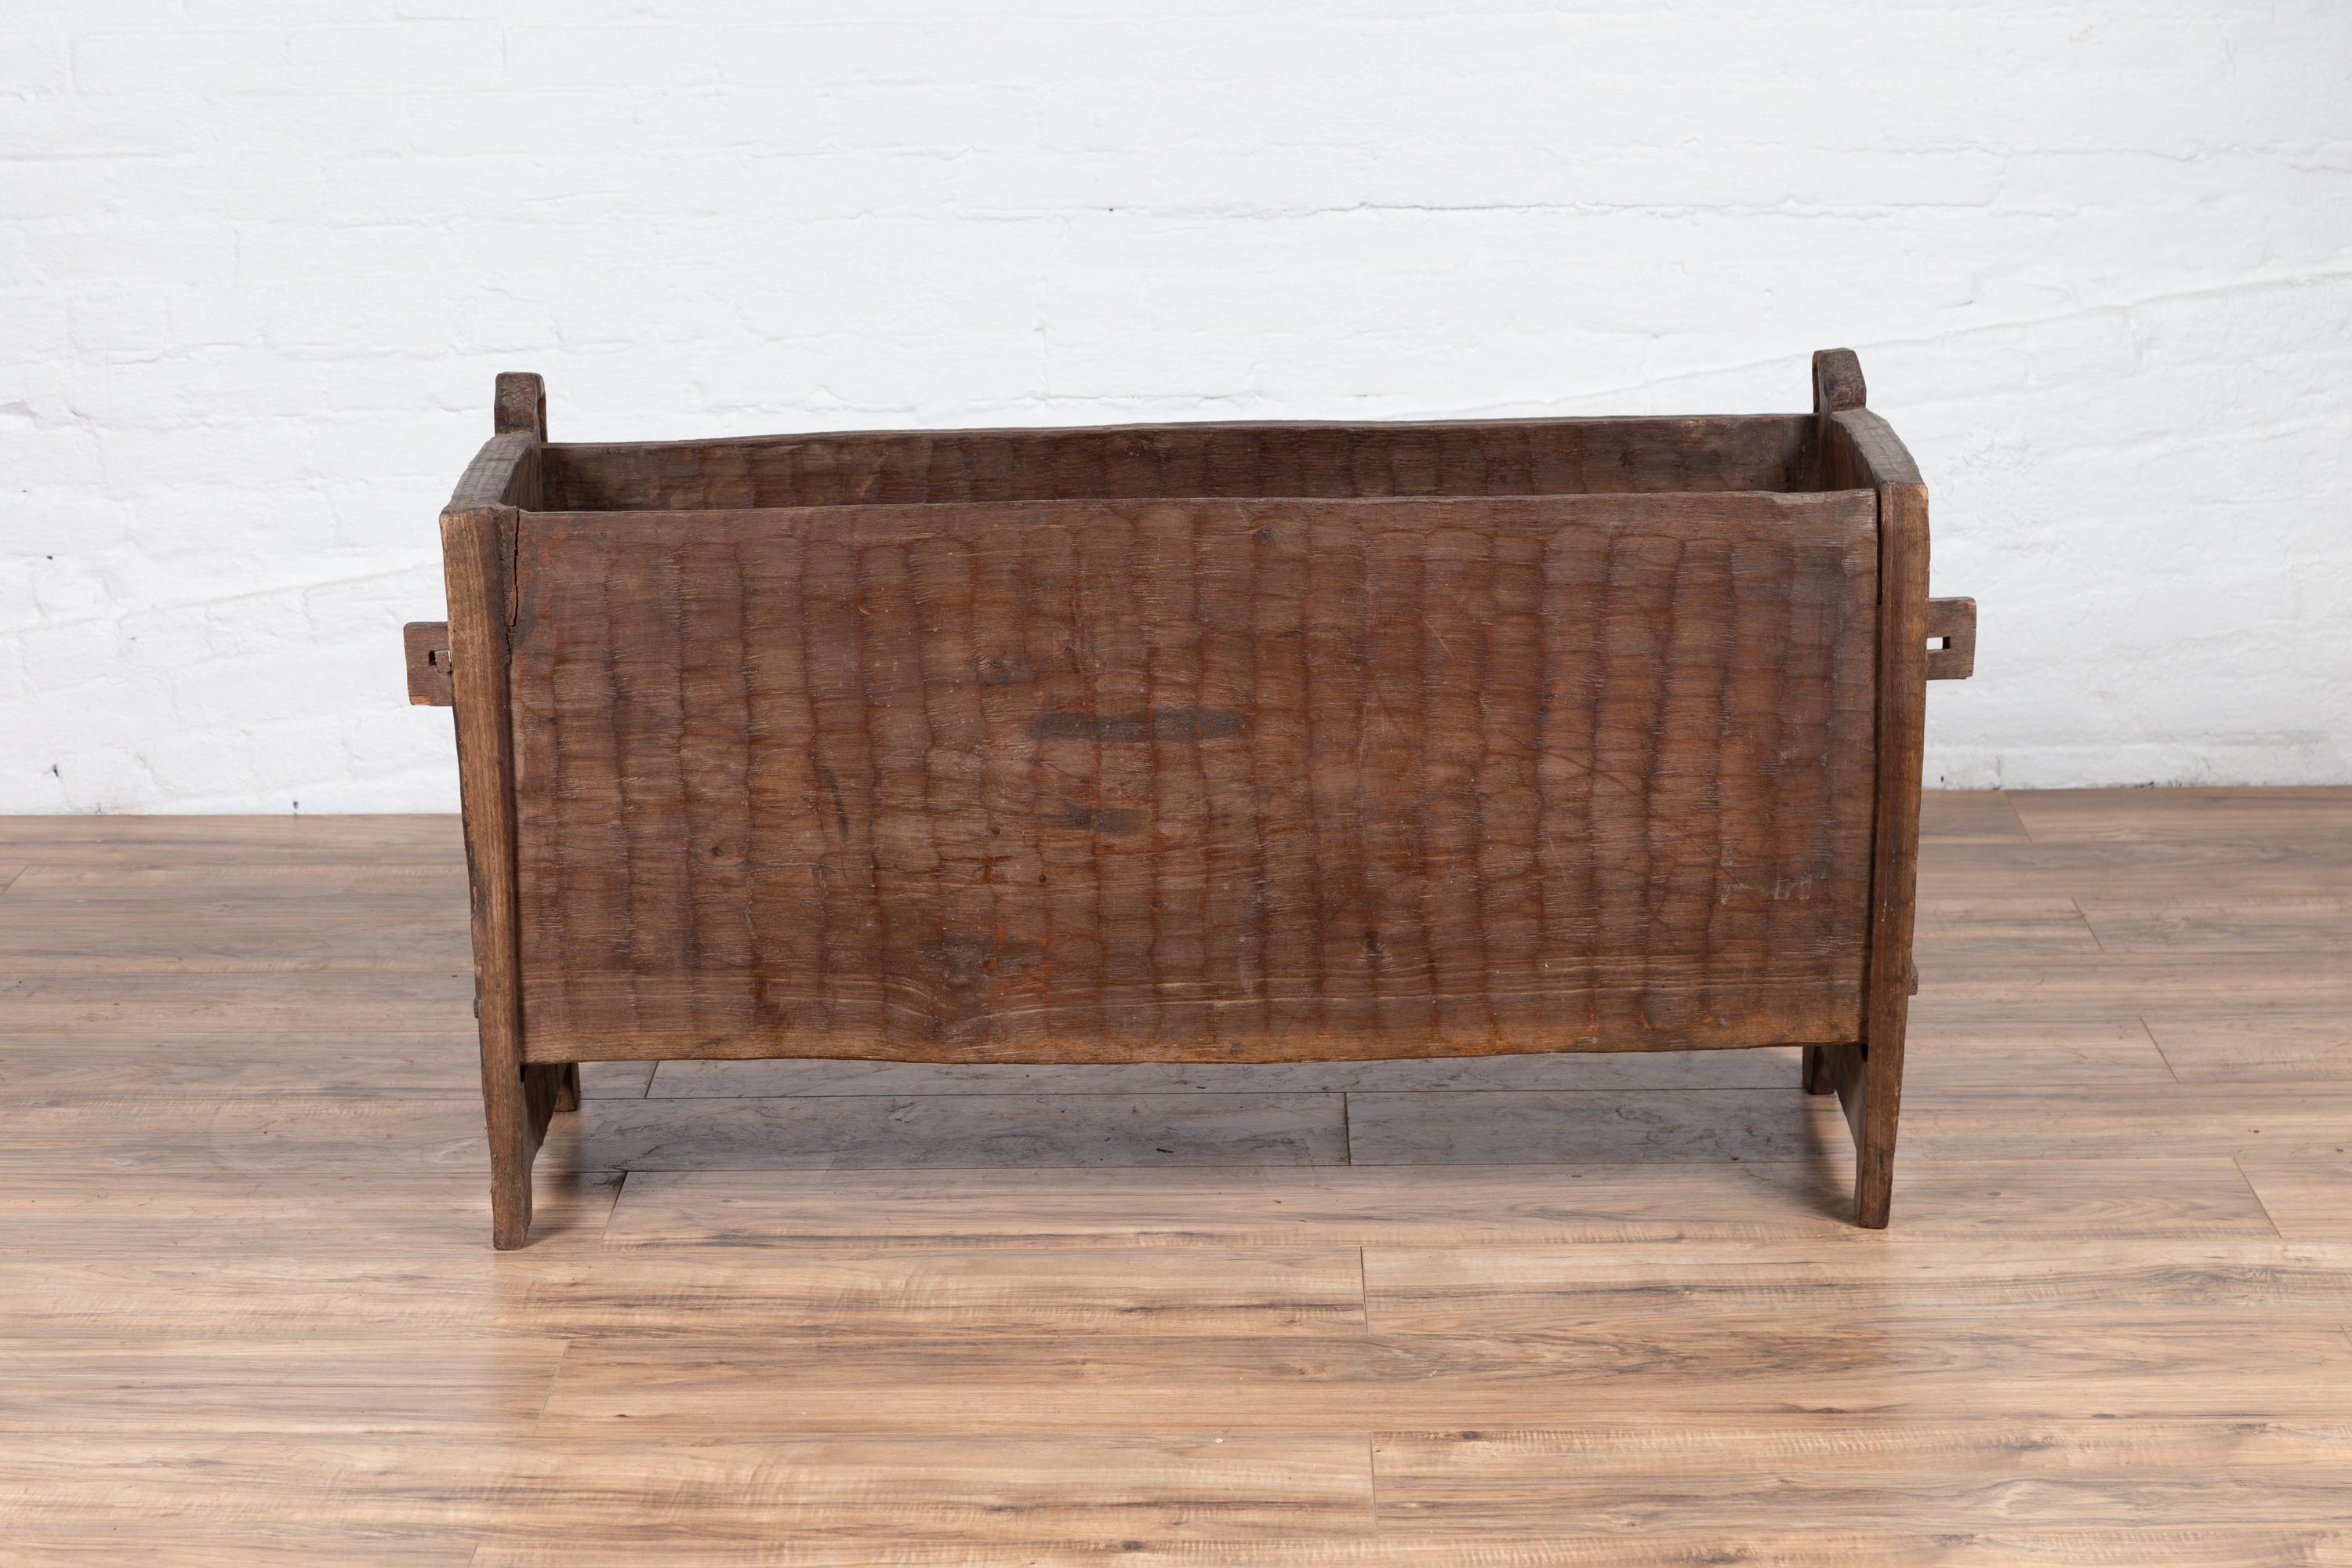 An antique Indian rustic wooden planter box from the early 20th century with nicely weathered appearance. Born in India during the early years of the 20th century, this wooden planter box charms our eyes with its rustic chiseled appearance and